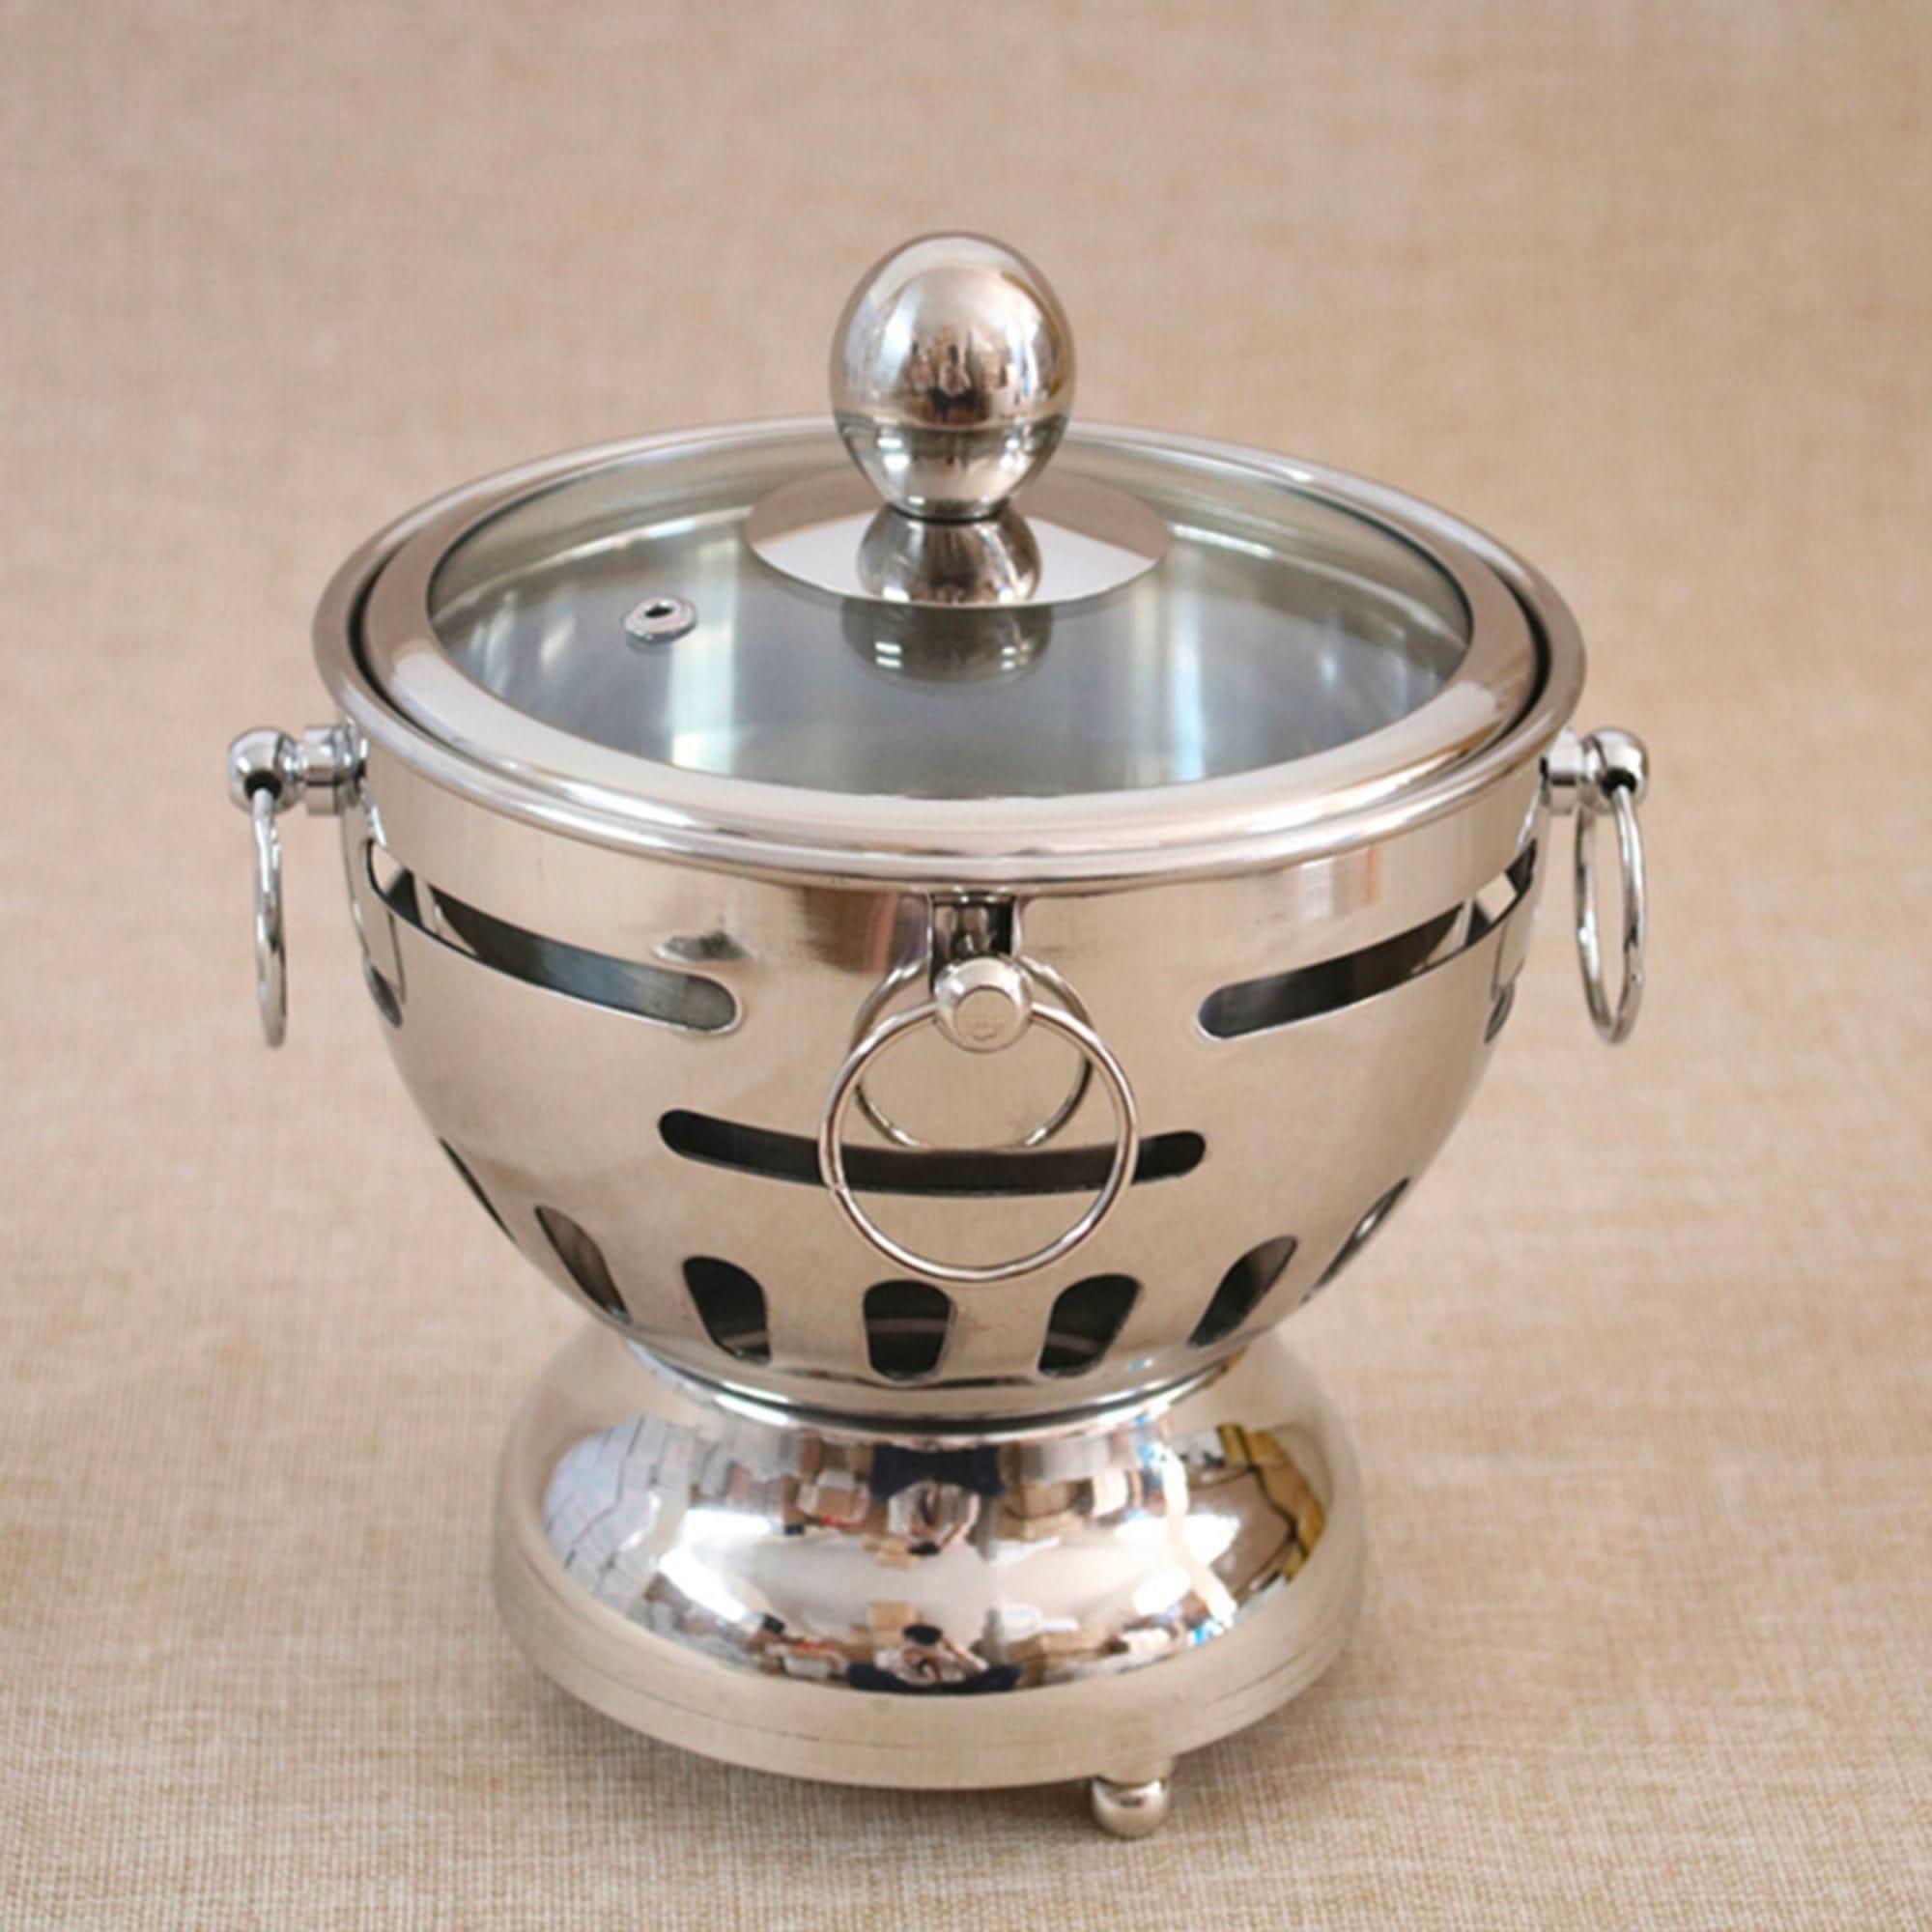 Soga Round Stainless Steel Single Hot Pot with Glass Lid 18.5cm Image 3